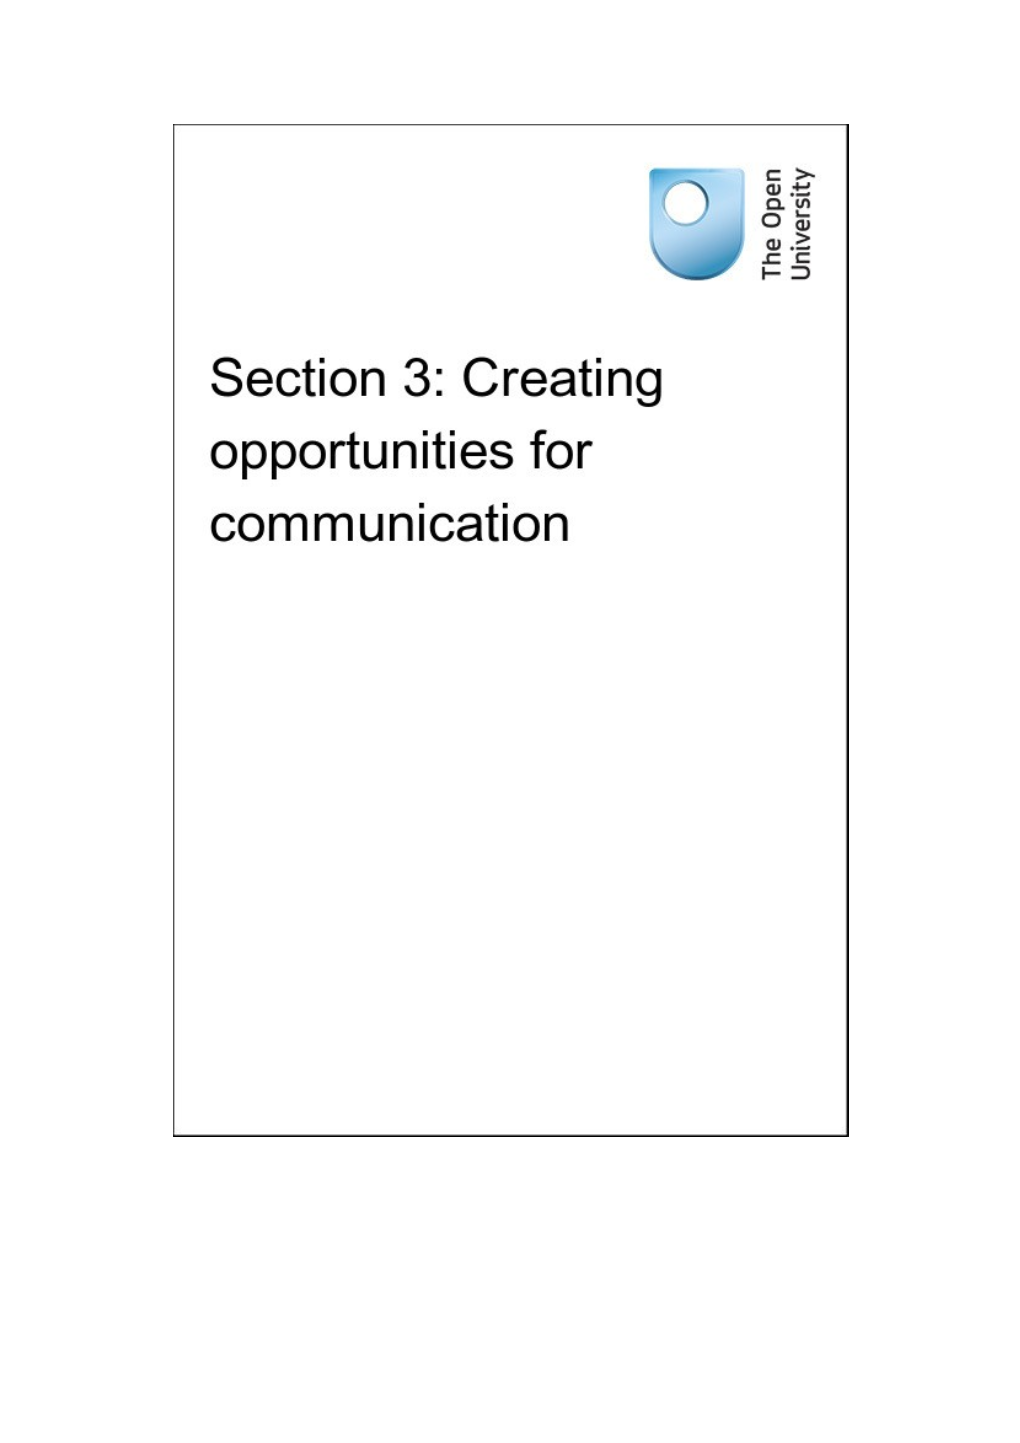 Section 3: Creating Opportunities for Communication